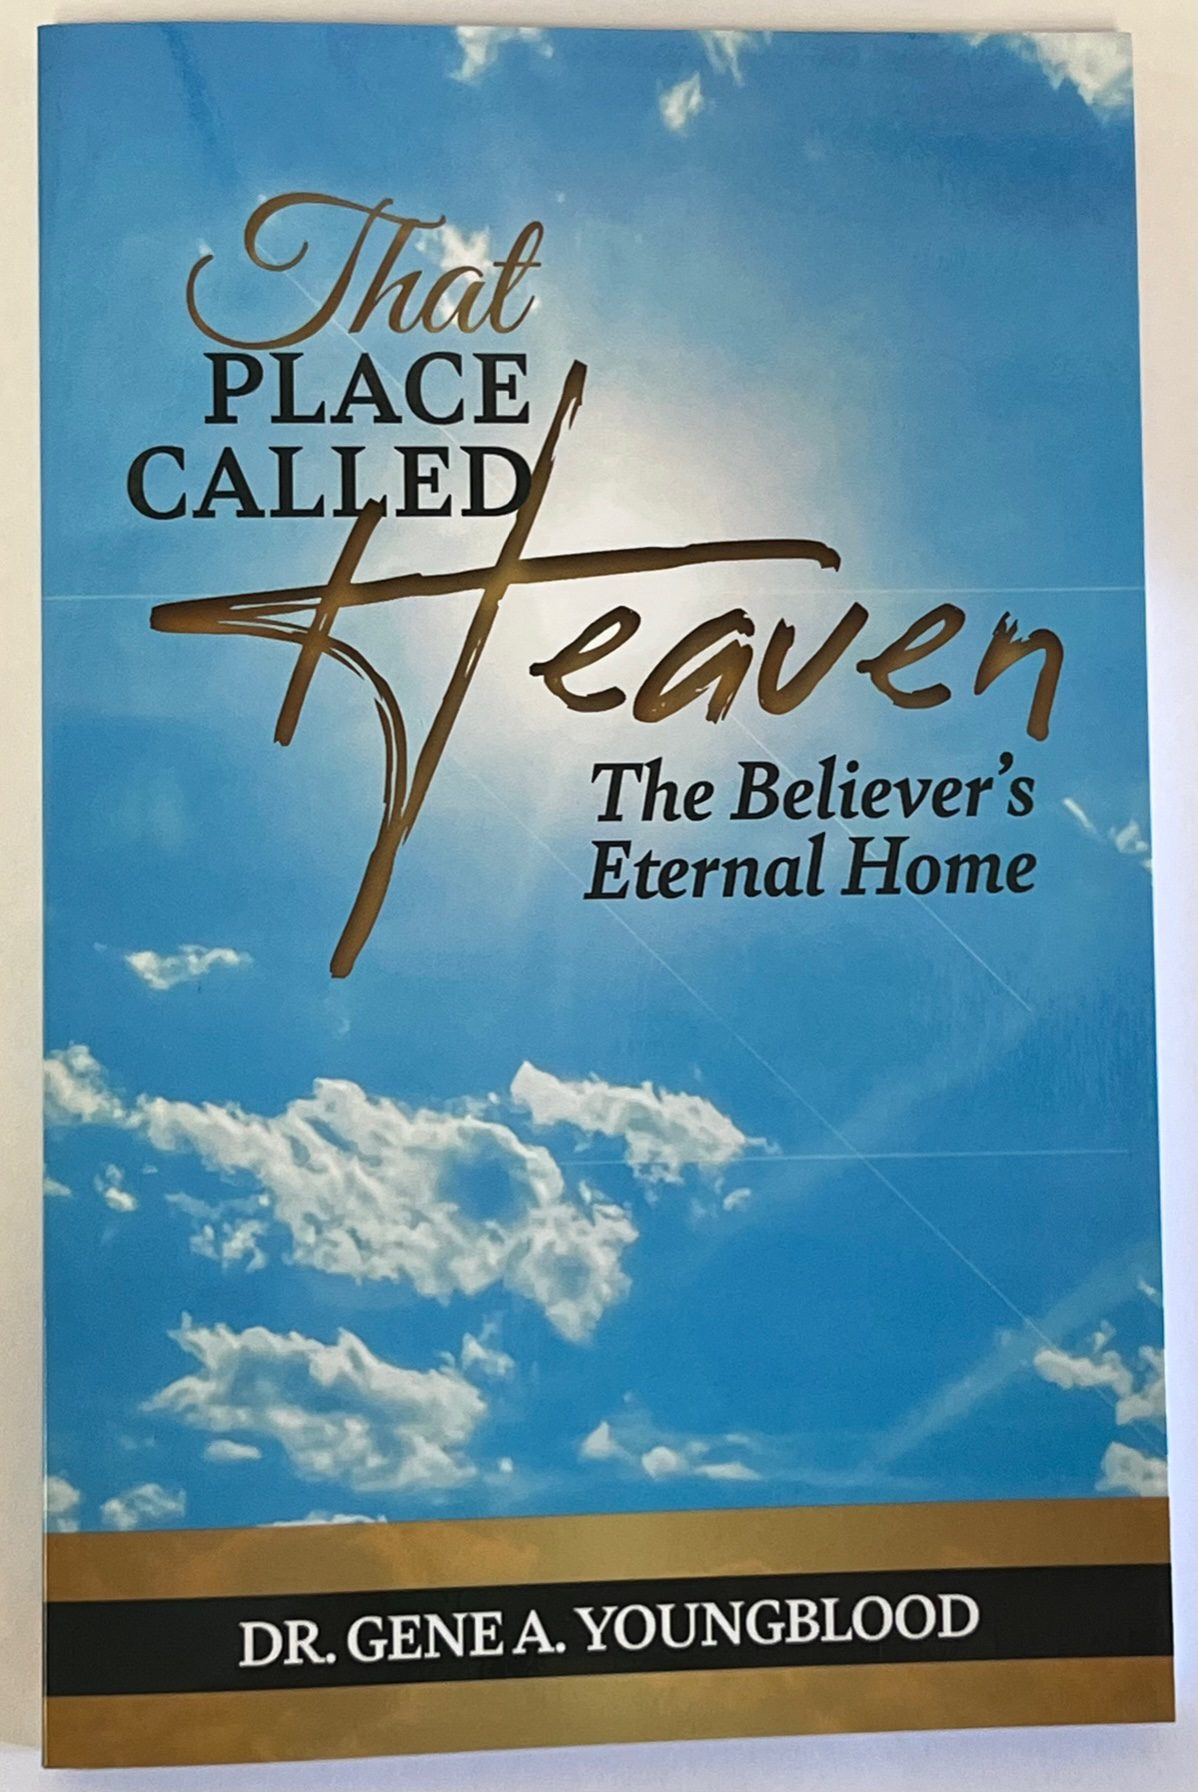 That Place Called Heaven- The Believer’s Eternal Home